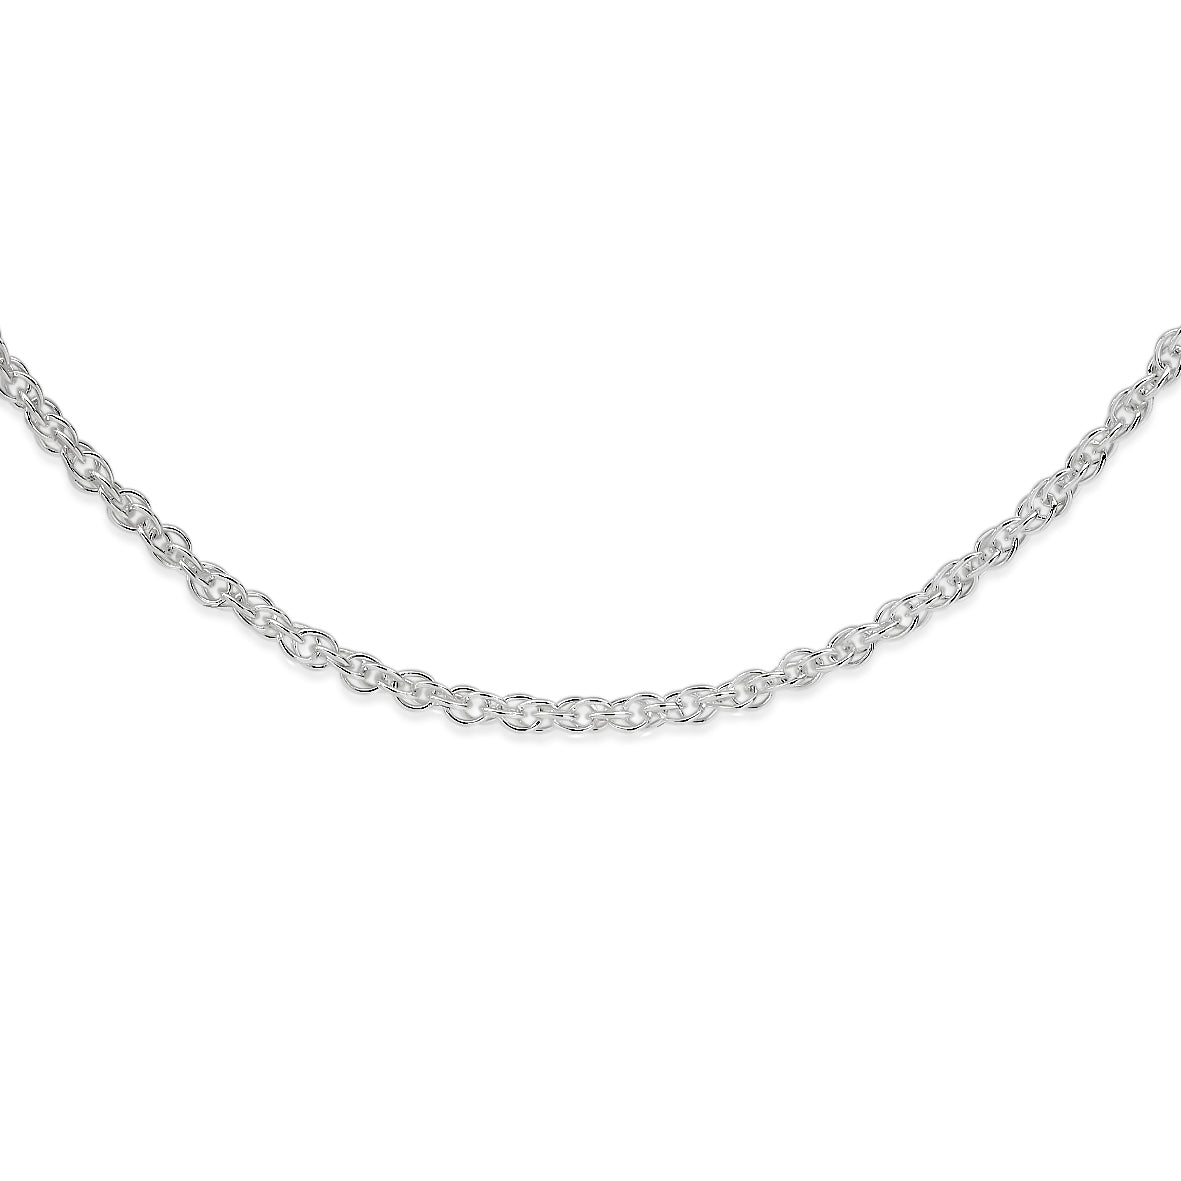 Sterling silver double cable link chain